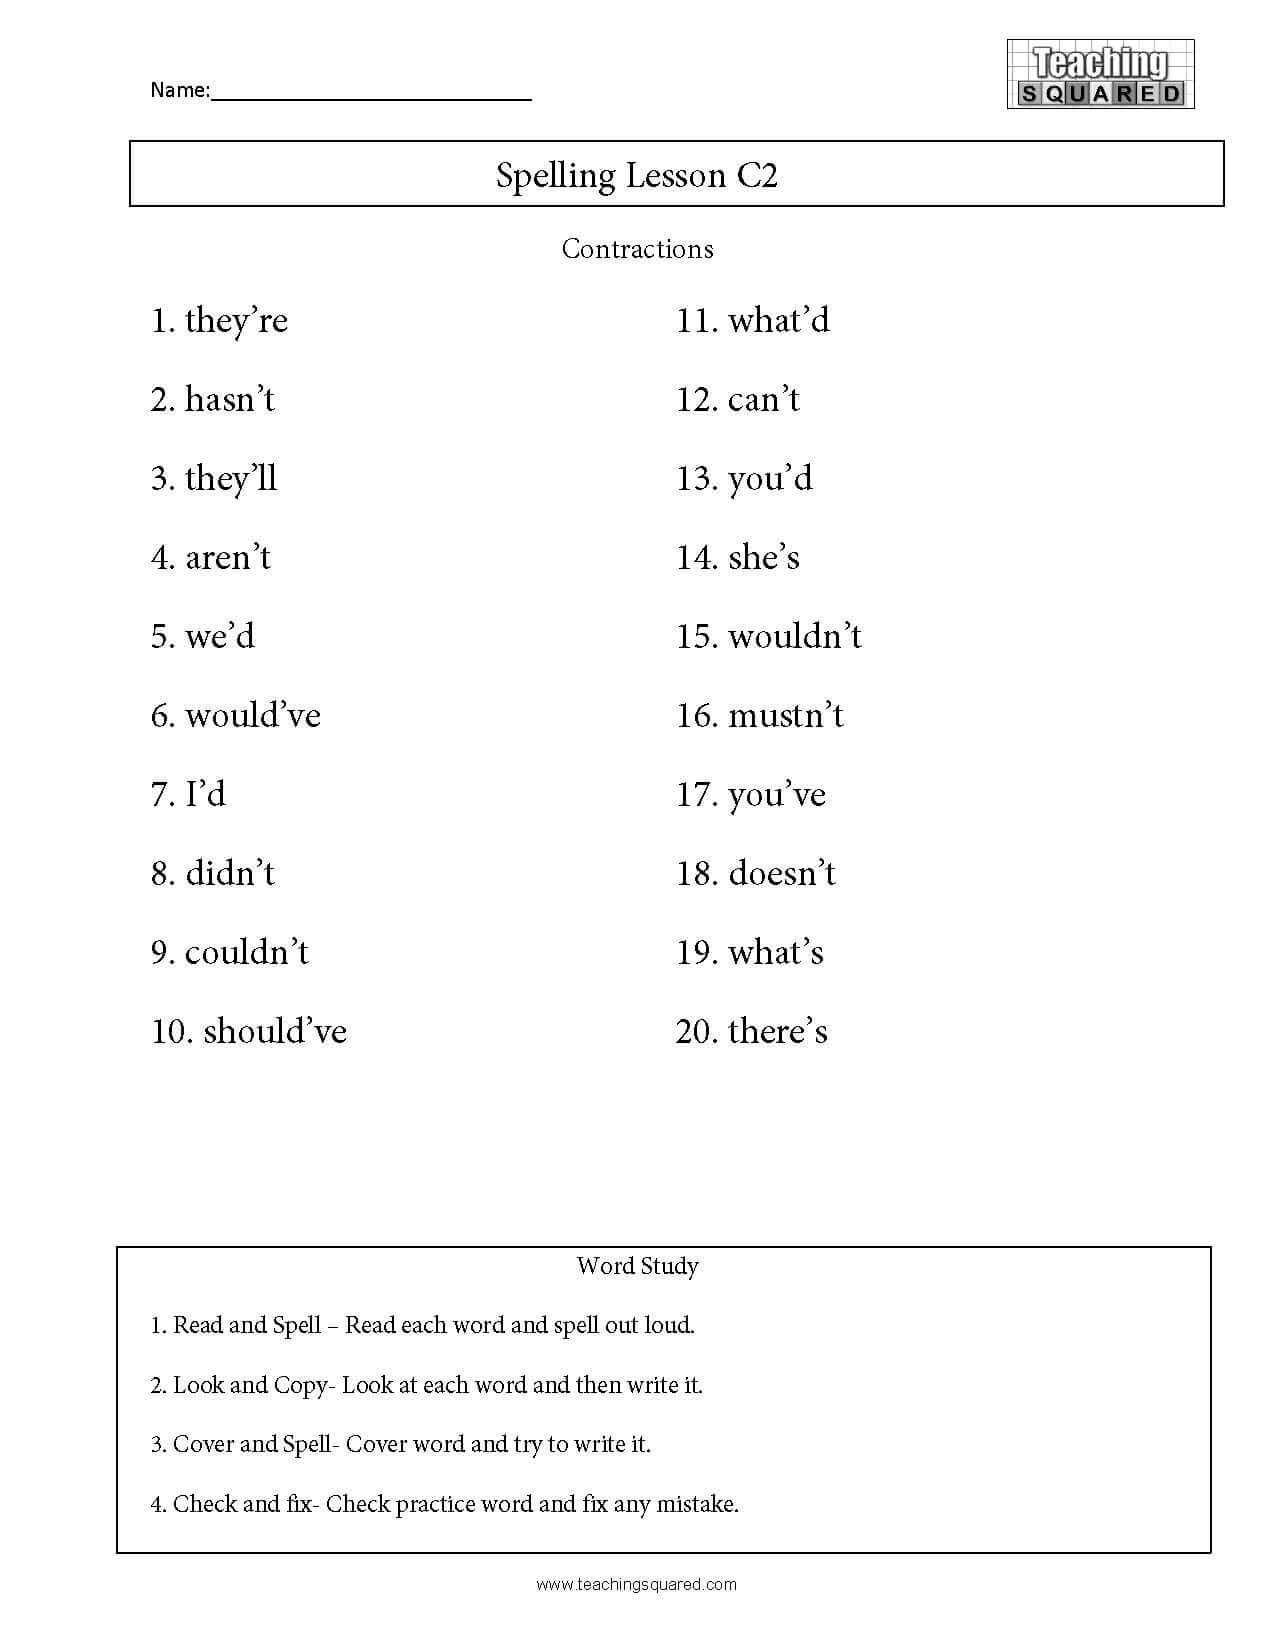 Contractions Worksheet 3rd Grade Spelling List C15 Contractions Teaching Squared